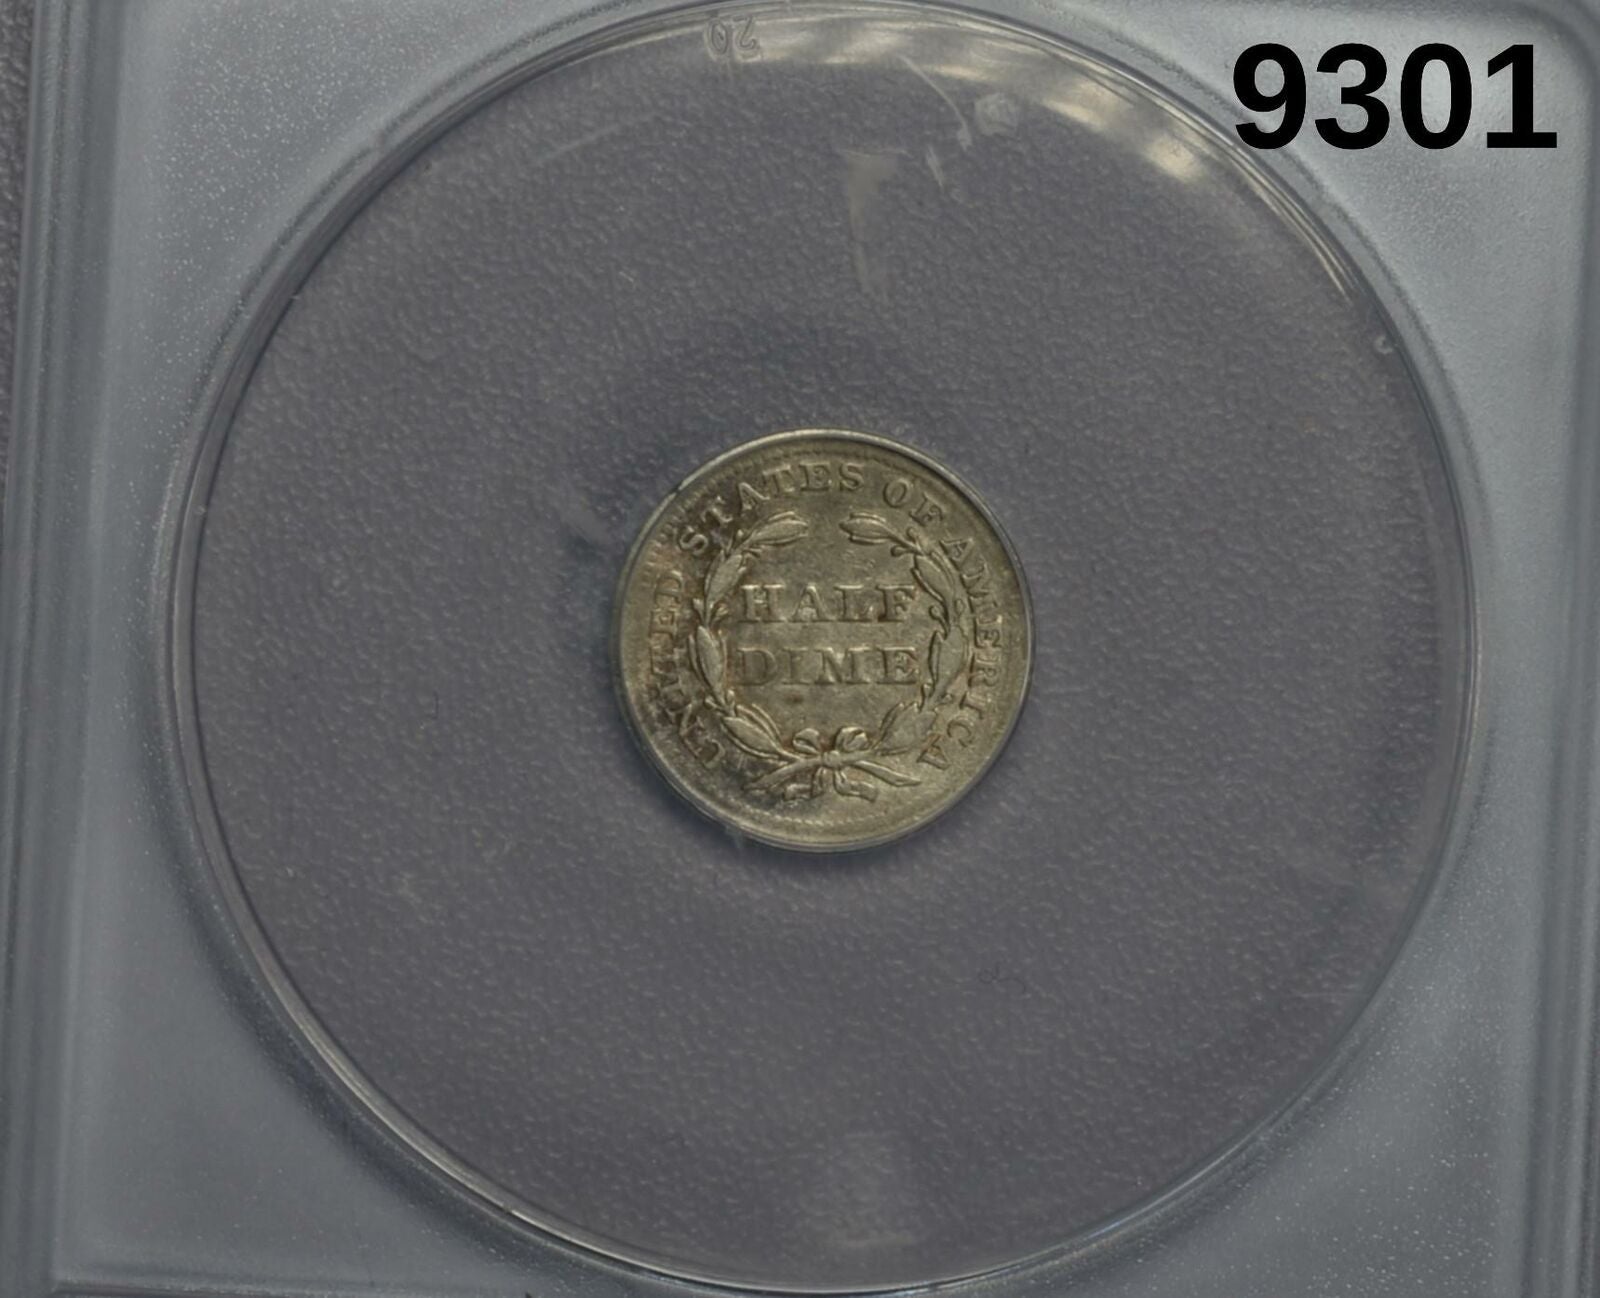 1856 SEATED HALF DIME ANACS CERTIFIED EF40 SCRATCHED #9301